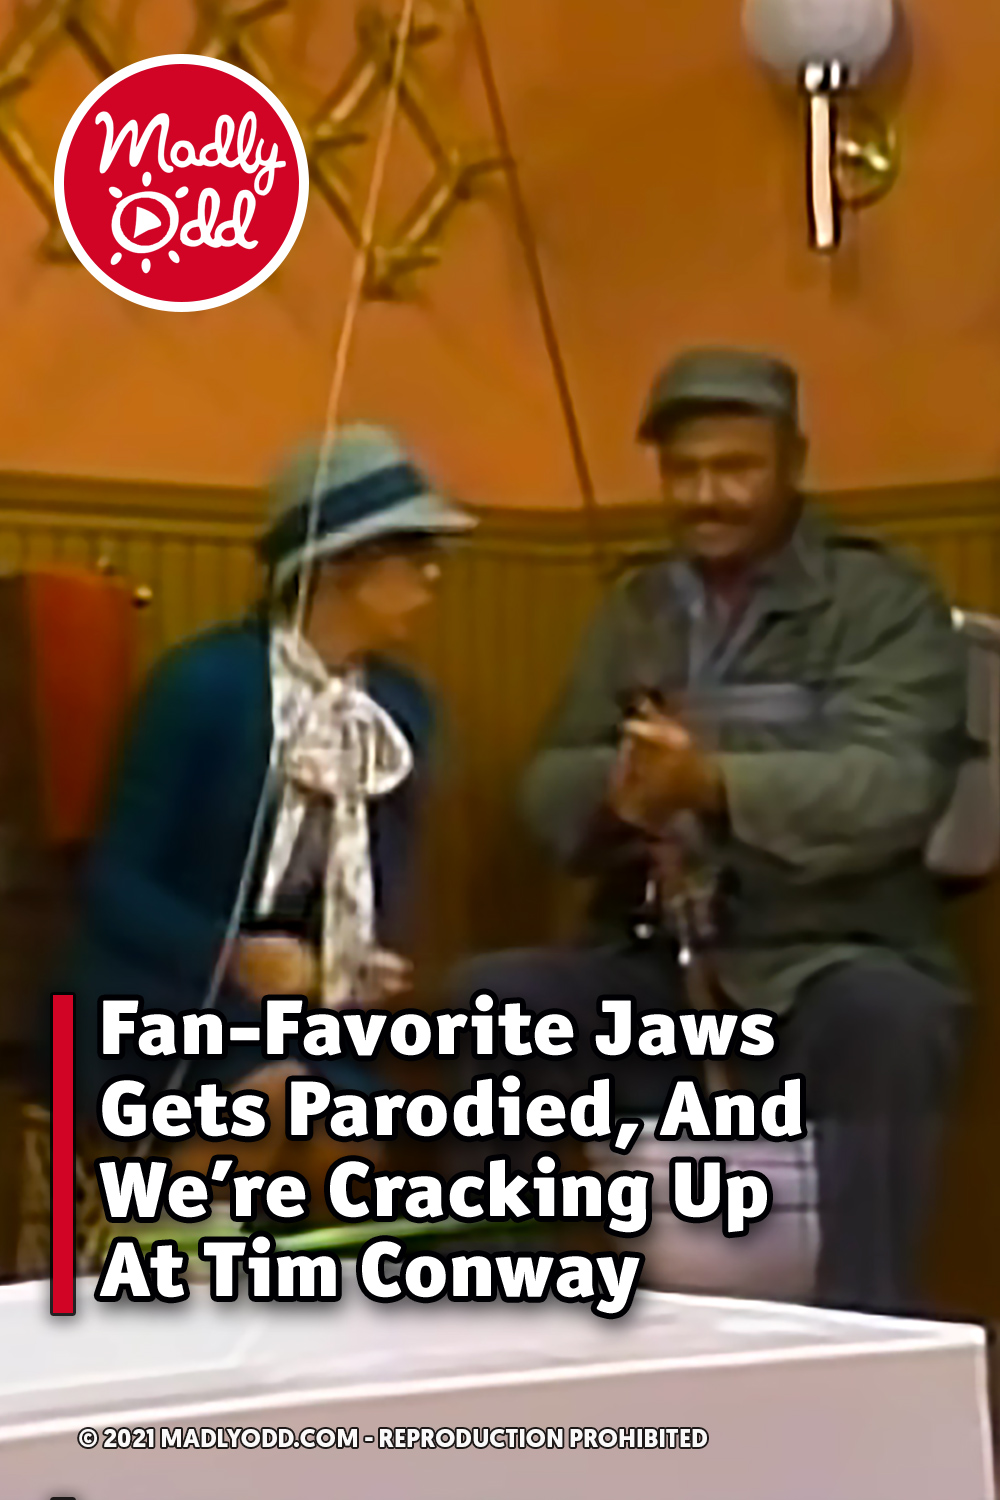 Fan-Favorite Jaws Gets Parodied, And We’re Cracking Up At Tim Conway